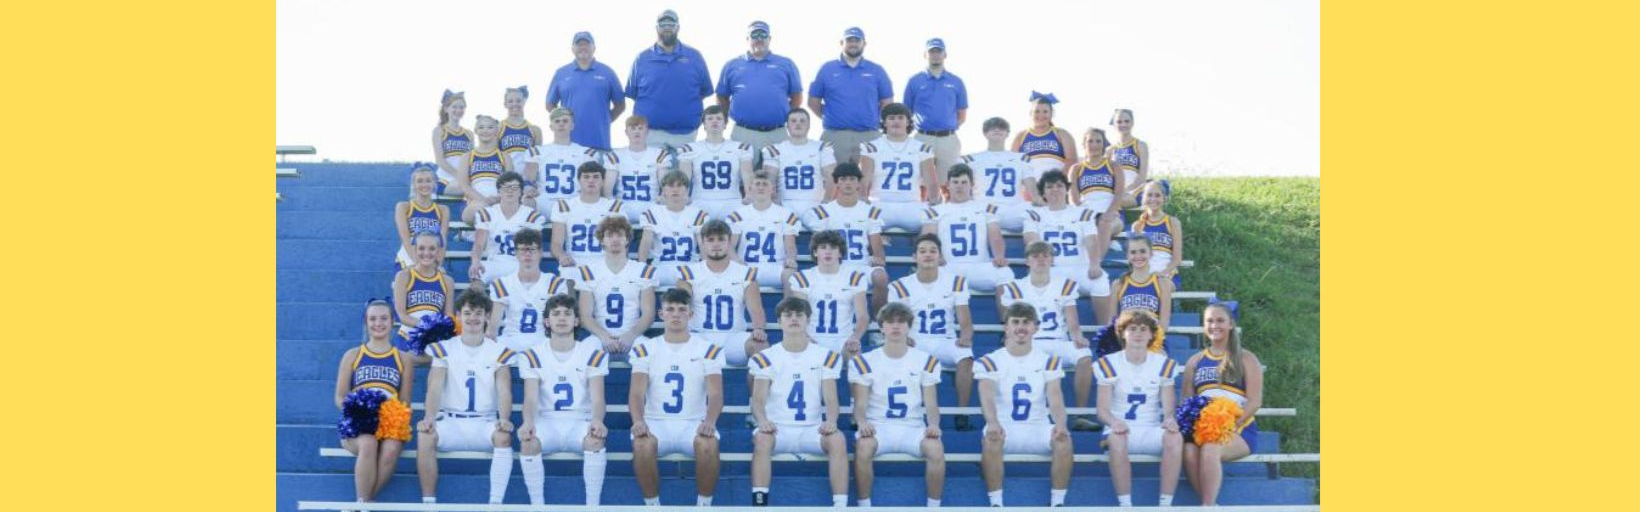 Blue Springs - Team Home Blue Springs Wildcats Sports